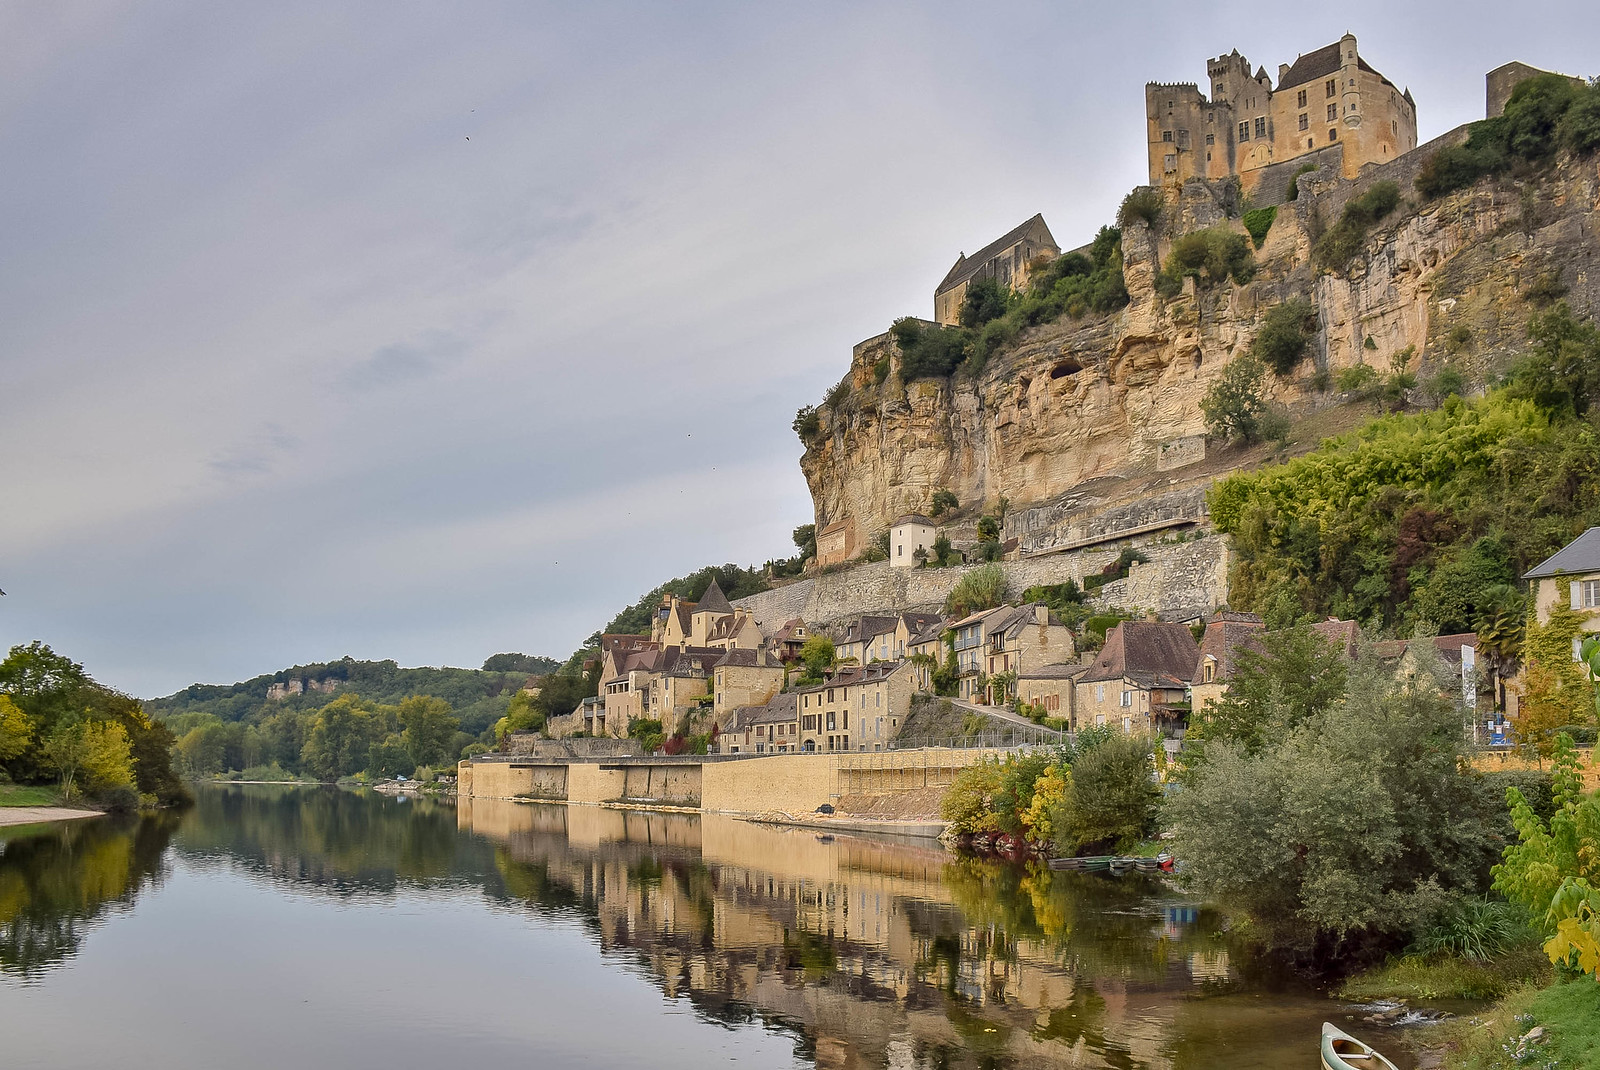 Medieval town of Rocque Gageac and its castle reflected on the river in France - - one of the prettiest towns in the Dordogne.